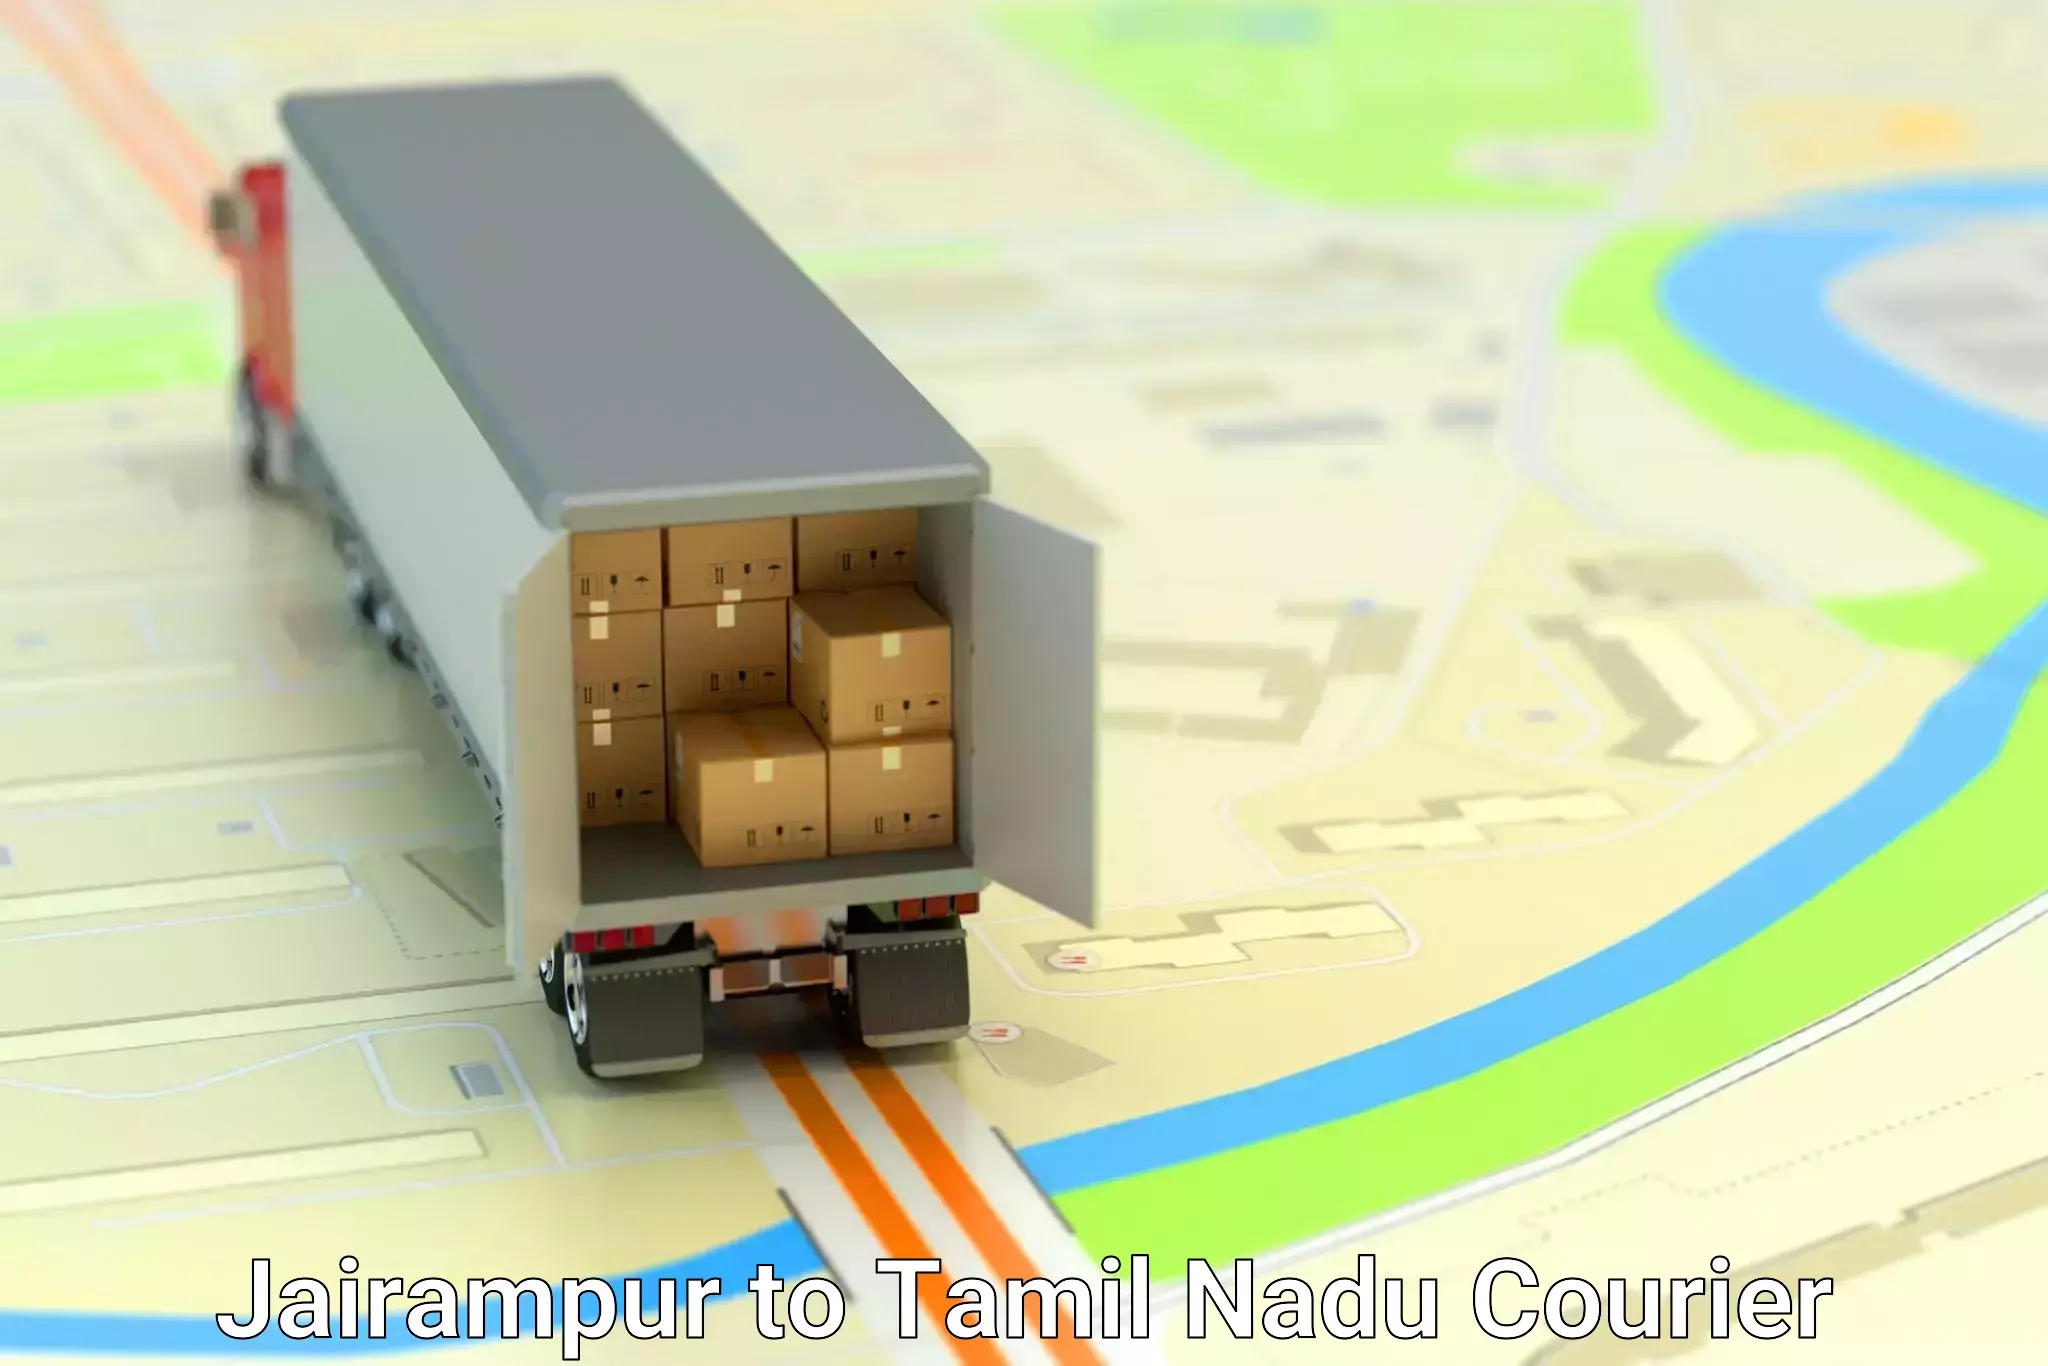 Large-scale shipping solutions in Jairampur to Tamil Nadu